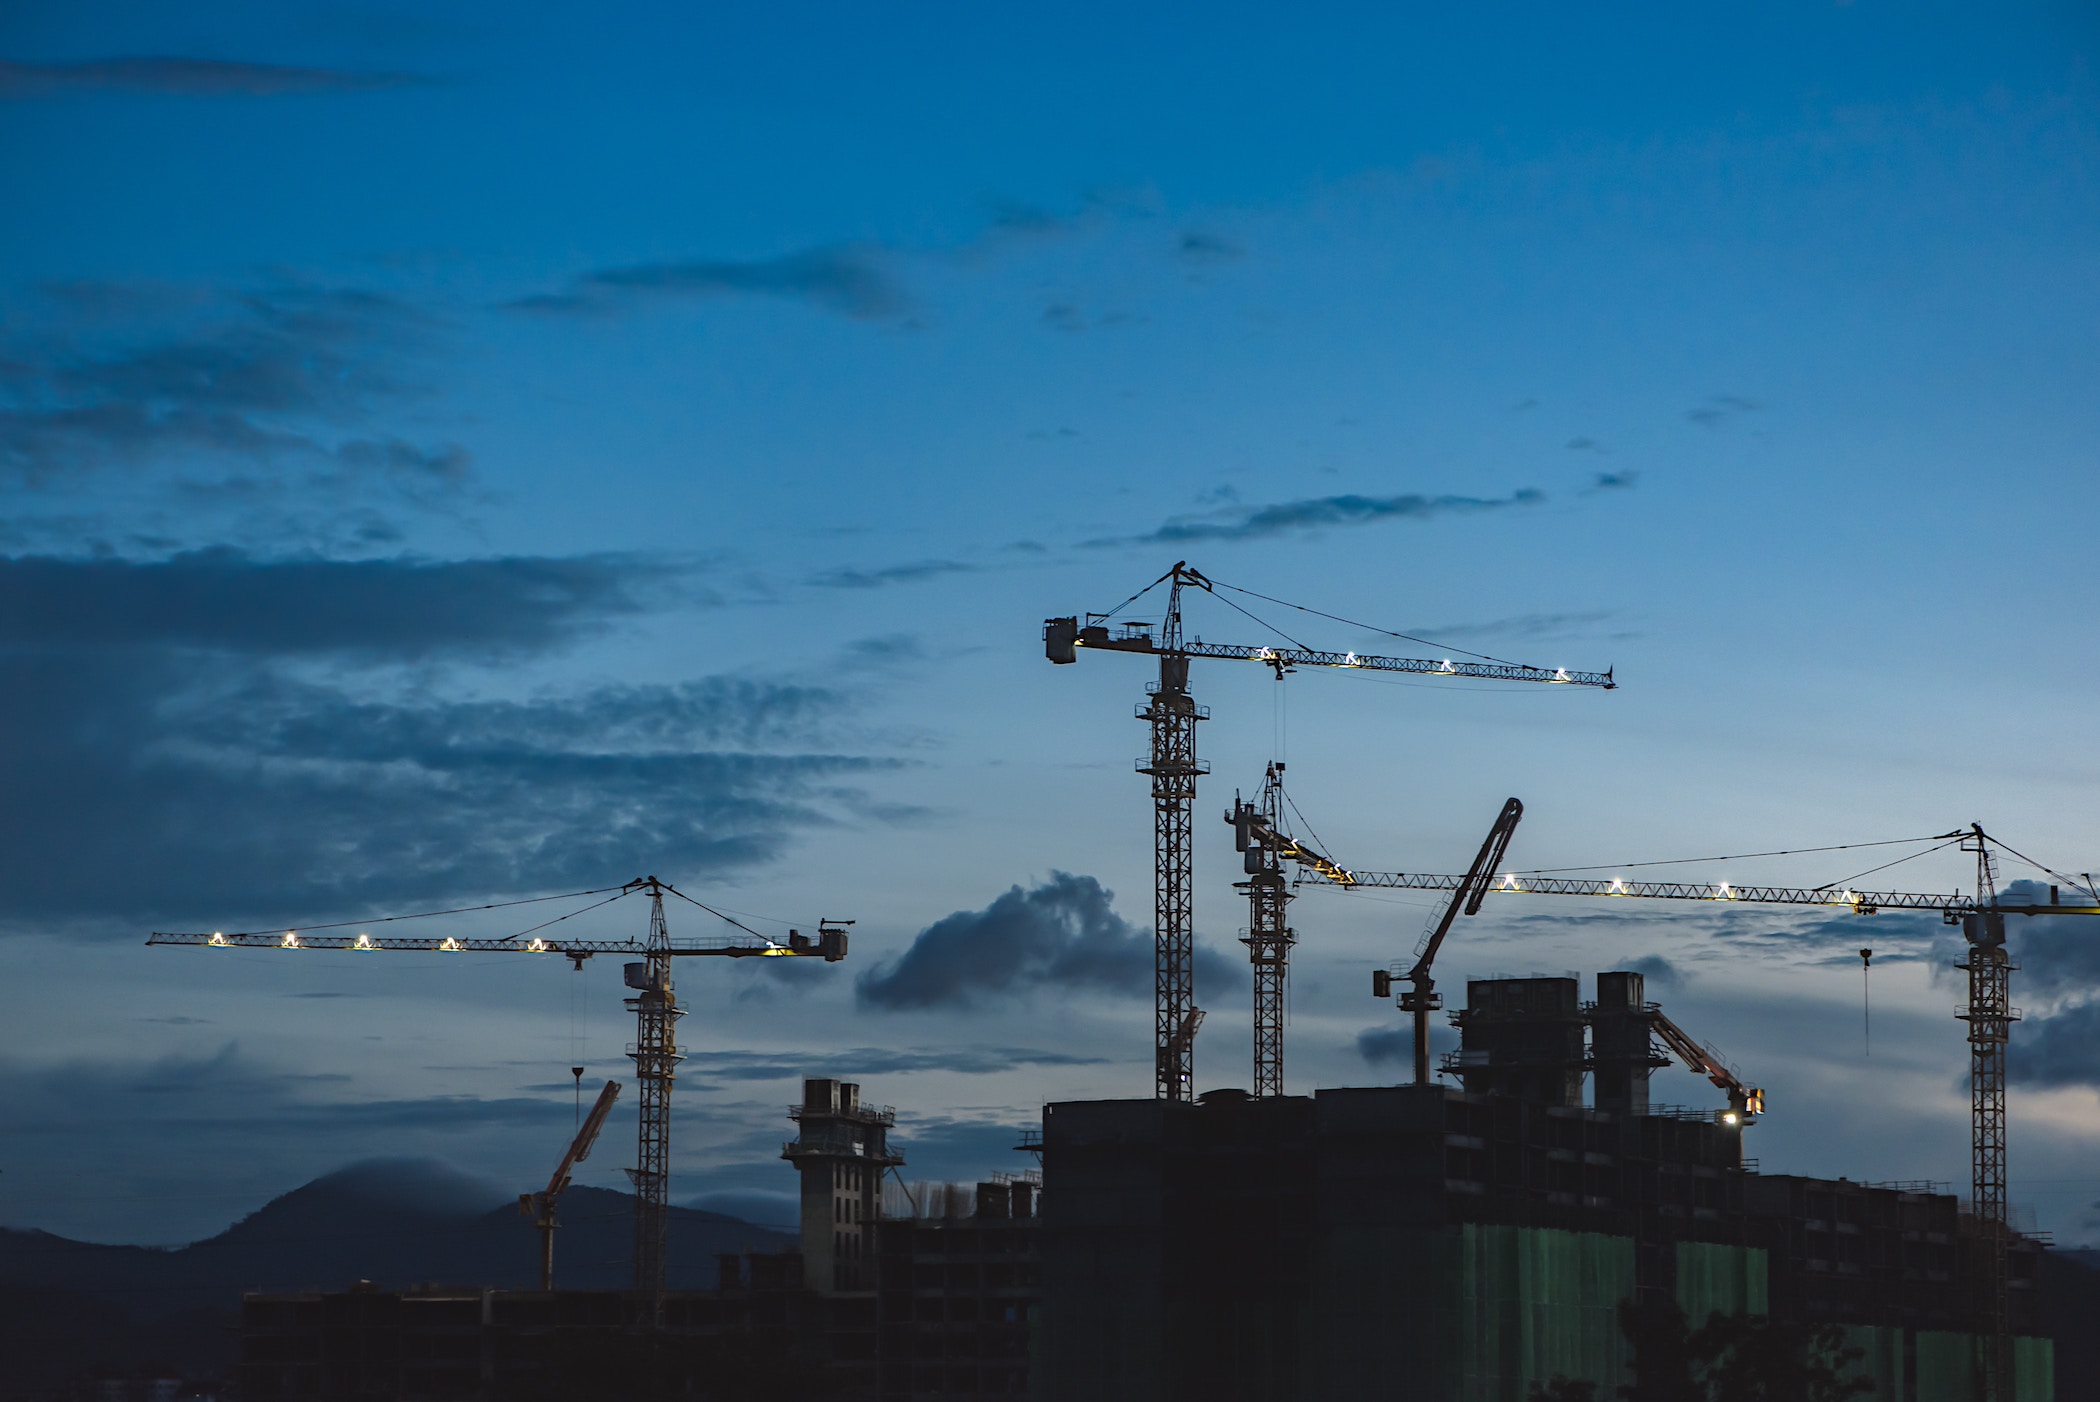 Construction site at twilight